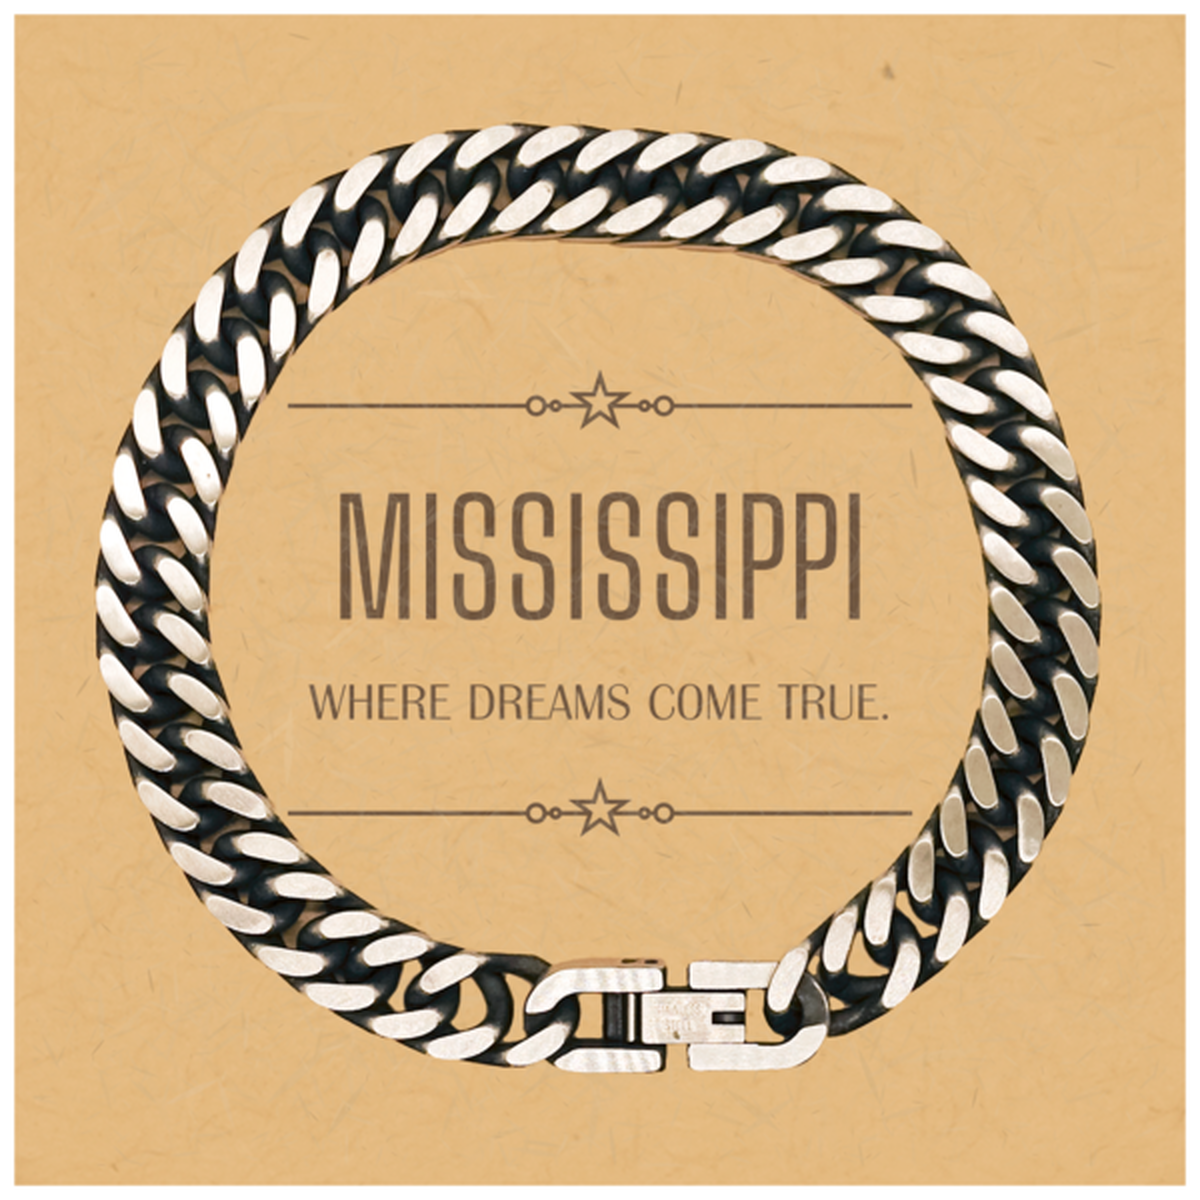 Love Mississippi State Cuban Link Chain Bracelet, Mississippi Where dreams come true, Birthday Christmas Inspirational Gifts For Mississippi Men, Women, Friends